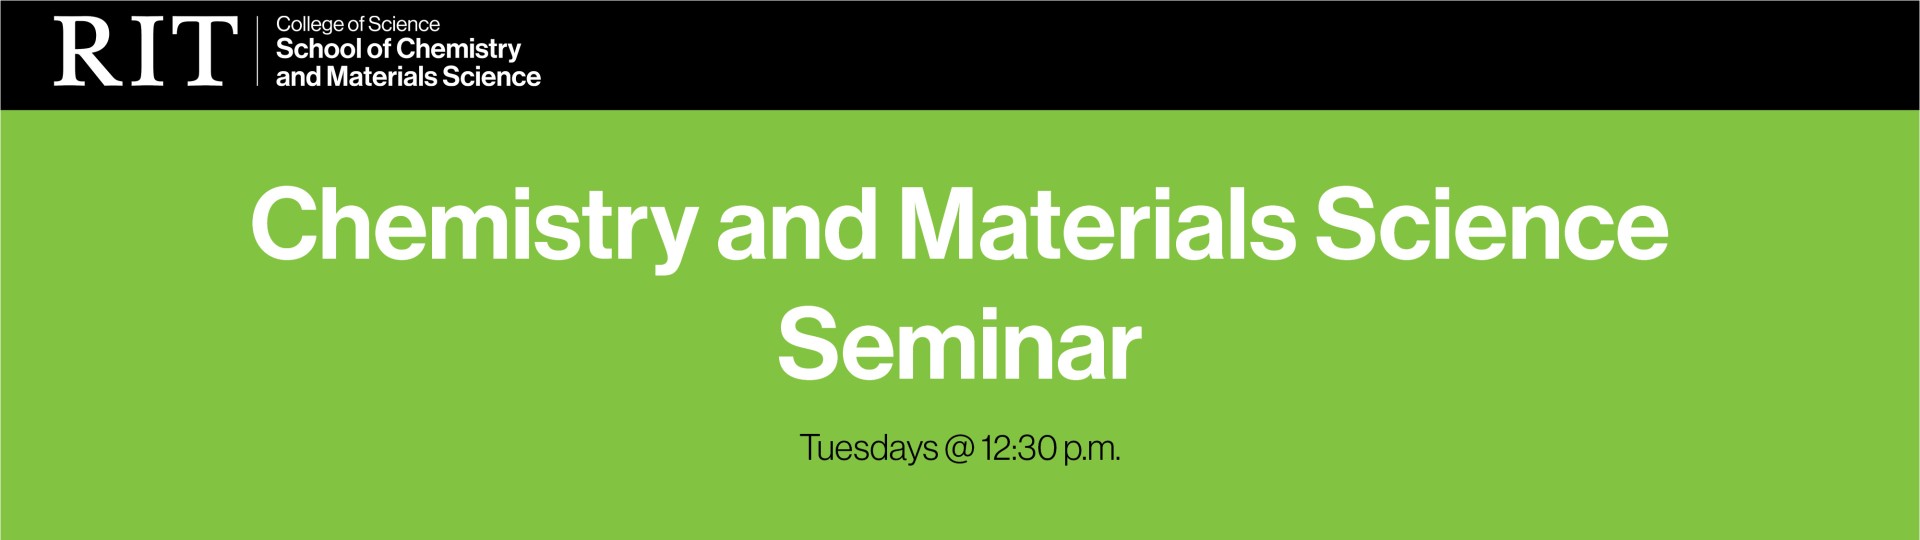 Chemistry and Materials Science Seminar Banner